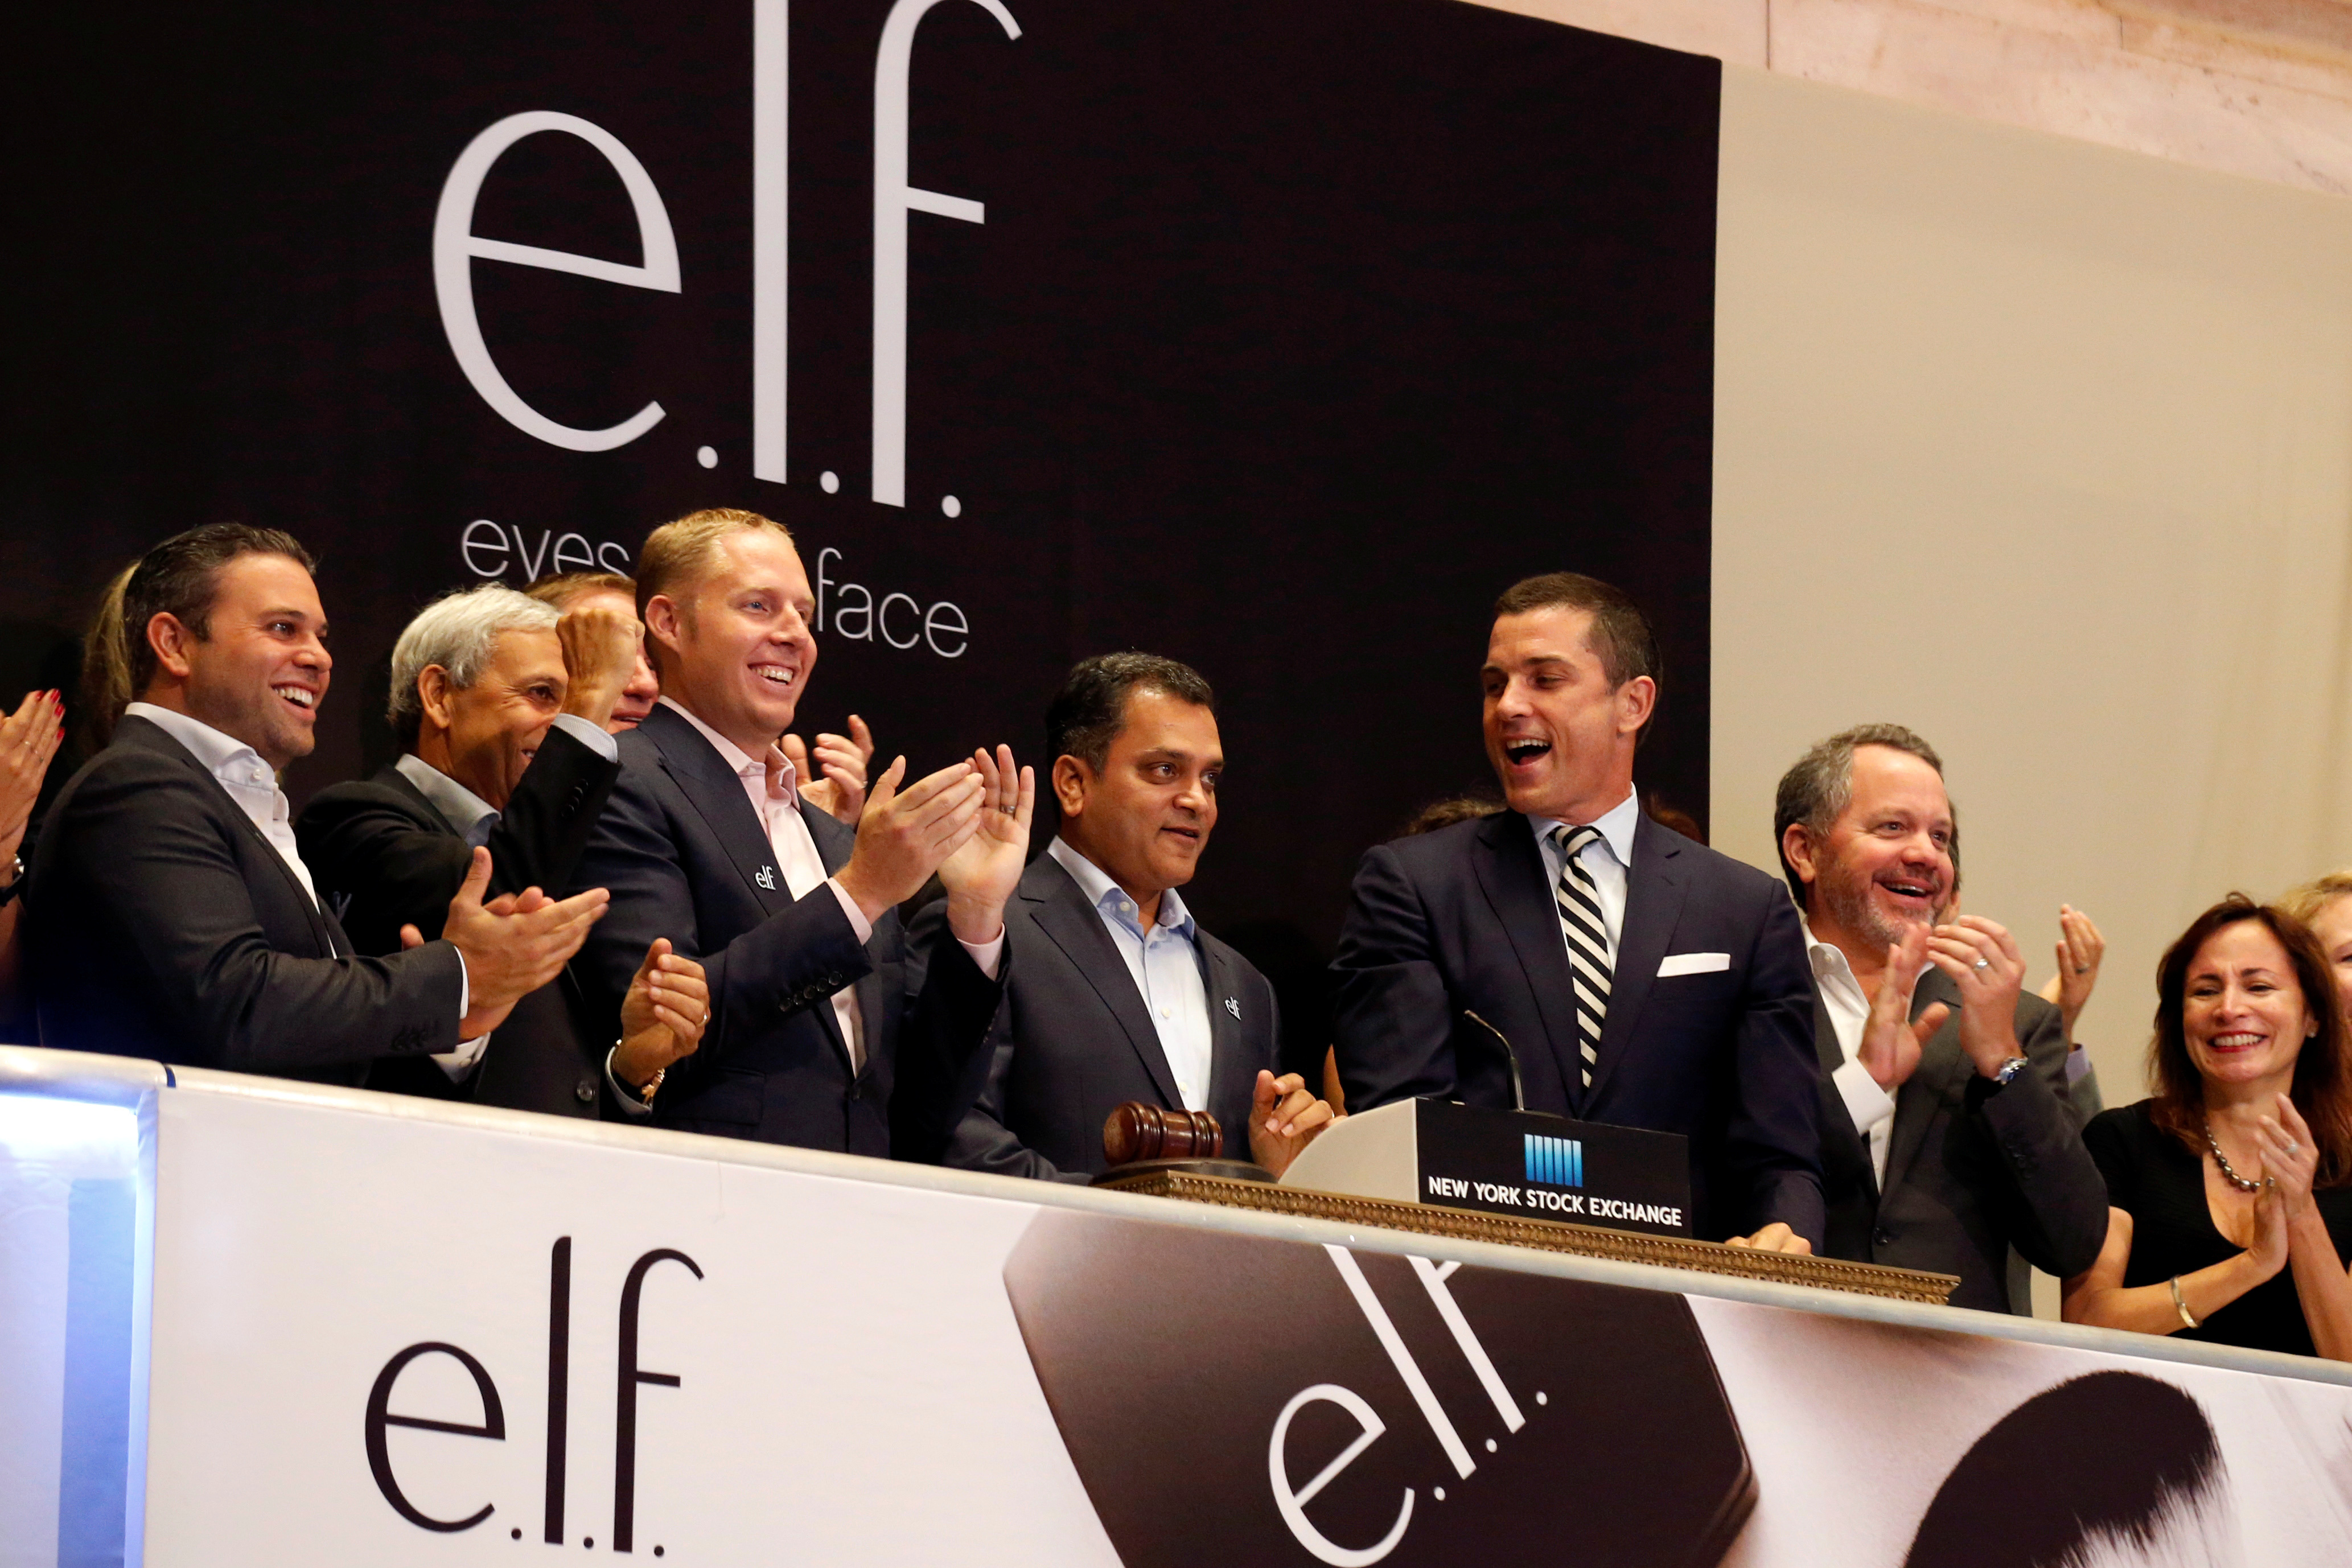 CEO of e.l.f. Beauty Inc. Tarang Amin rings the opening bell at the NYSE to celebrate his company's IPO in New York City